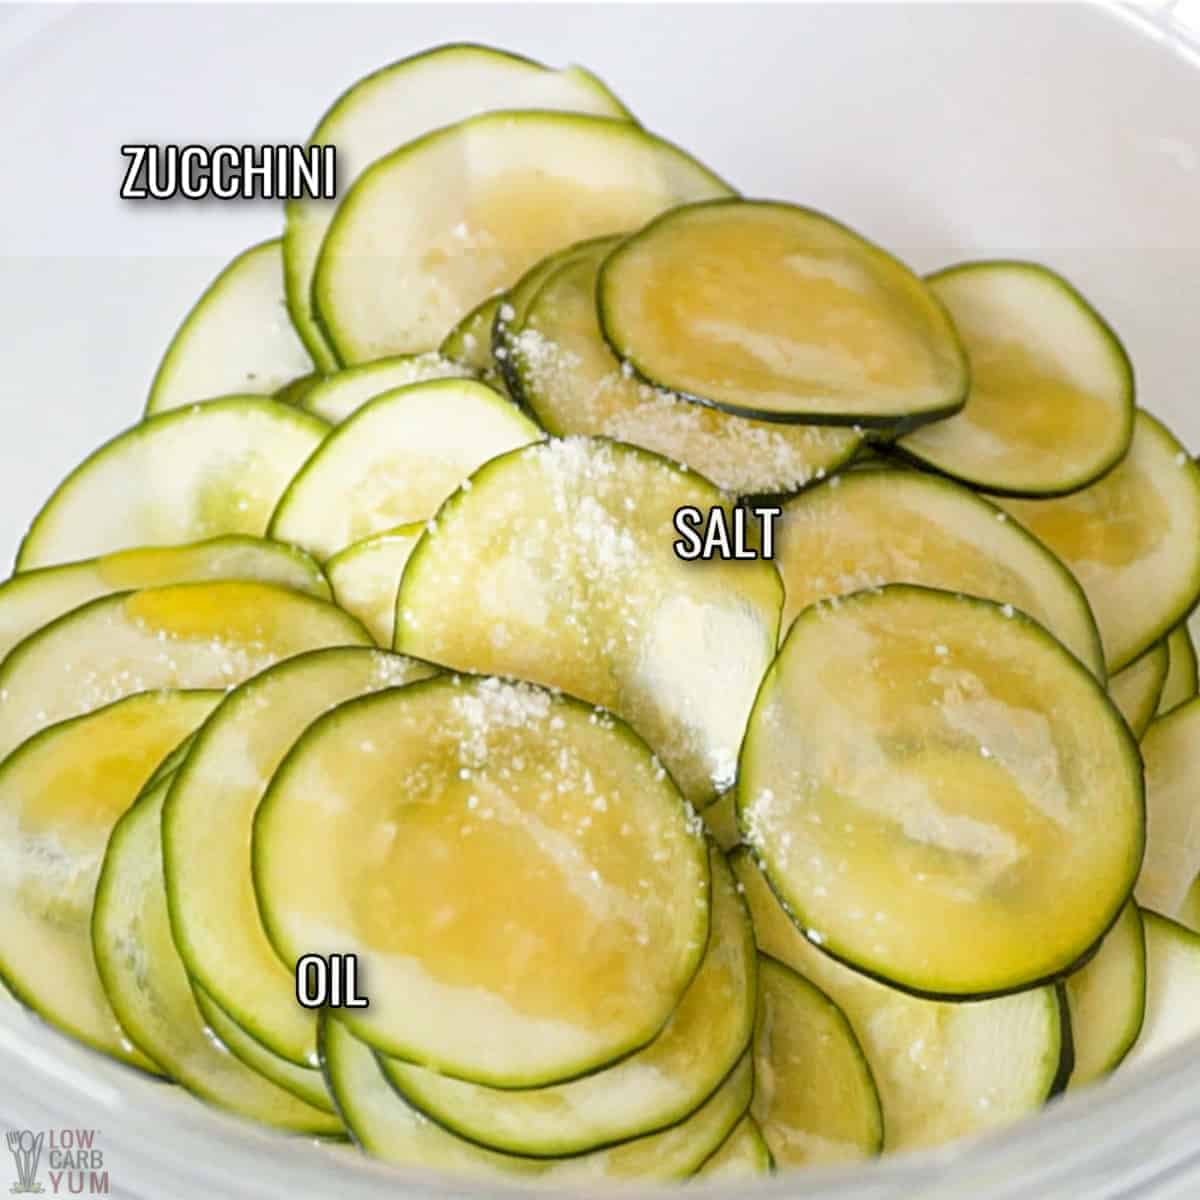 ingredients for zucchini chips.